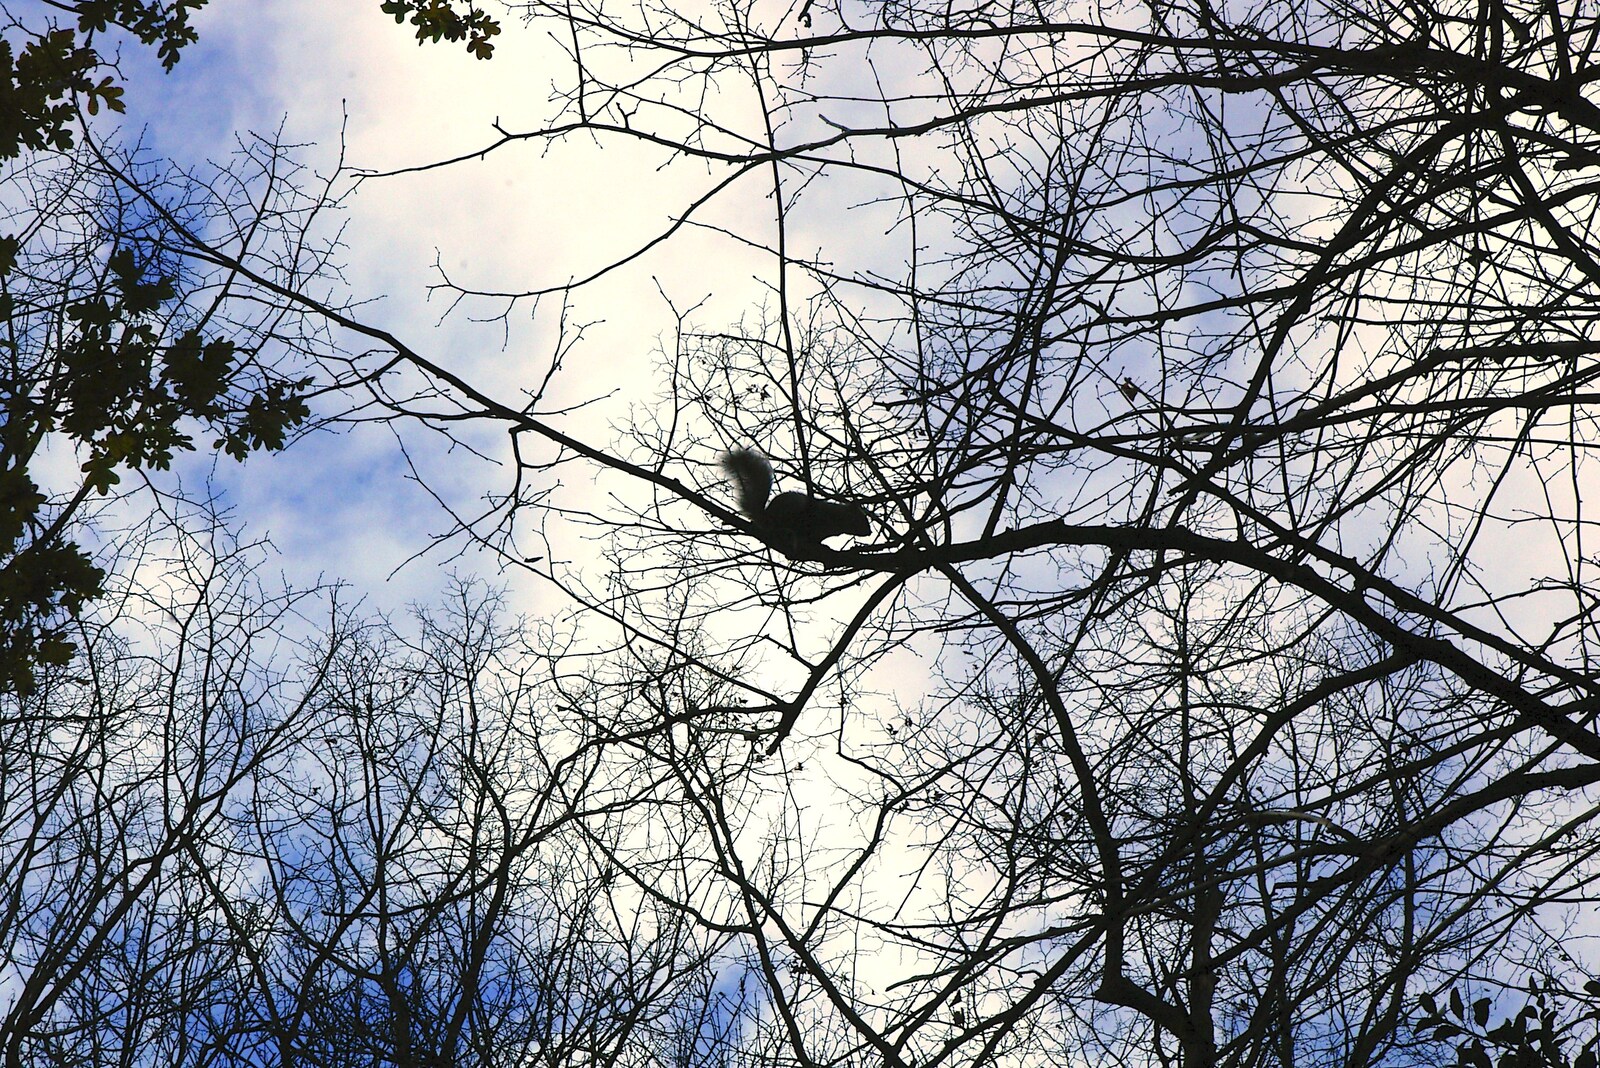 The outline of a squirrel in a tree from Autumn Colleges: a Wander around The Backs, Cambridge - 26th November